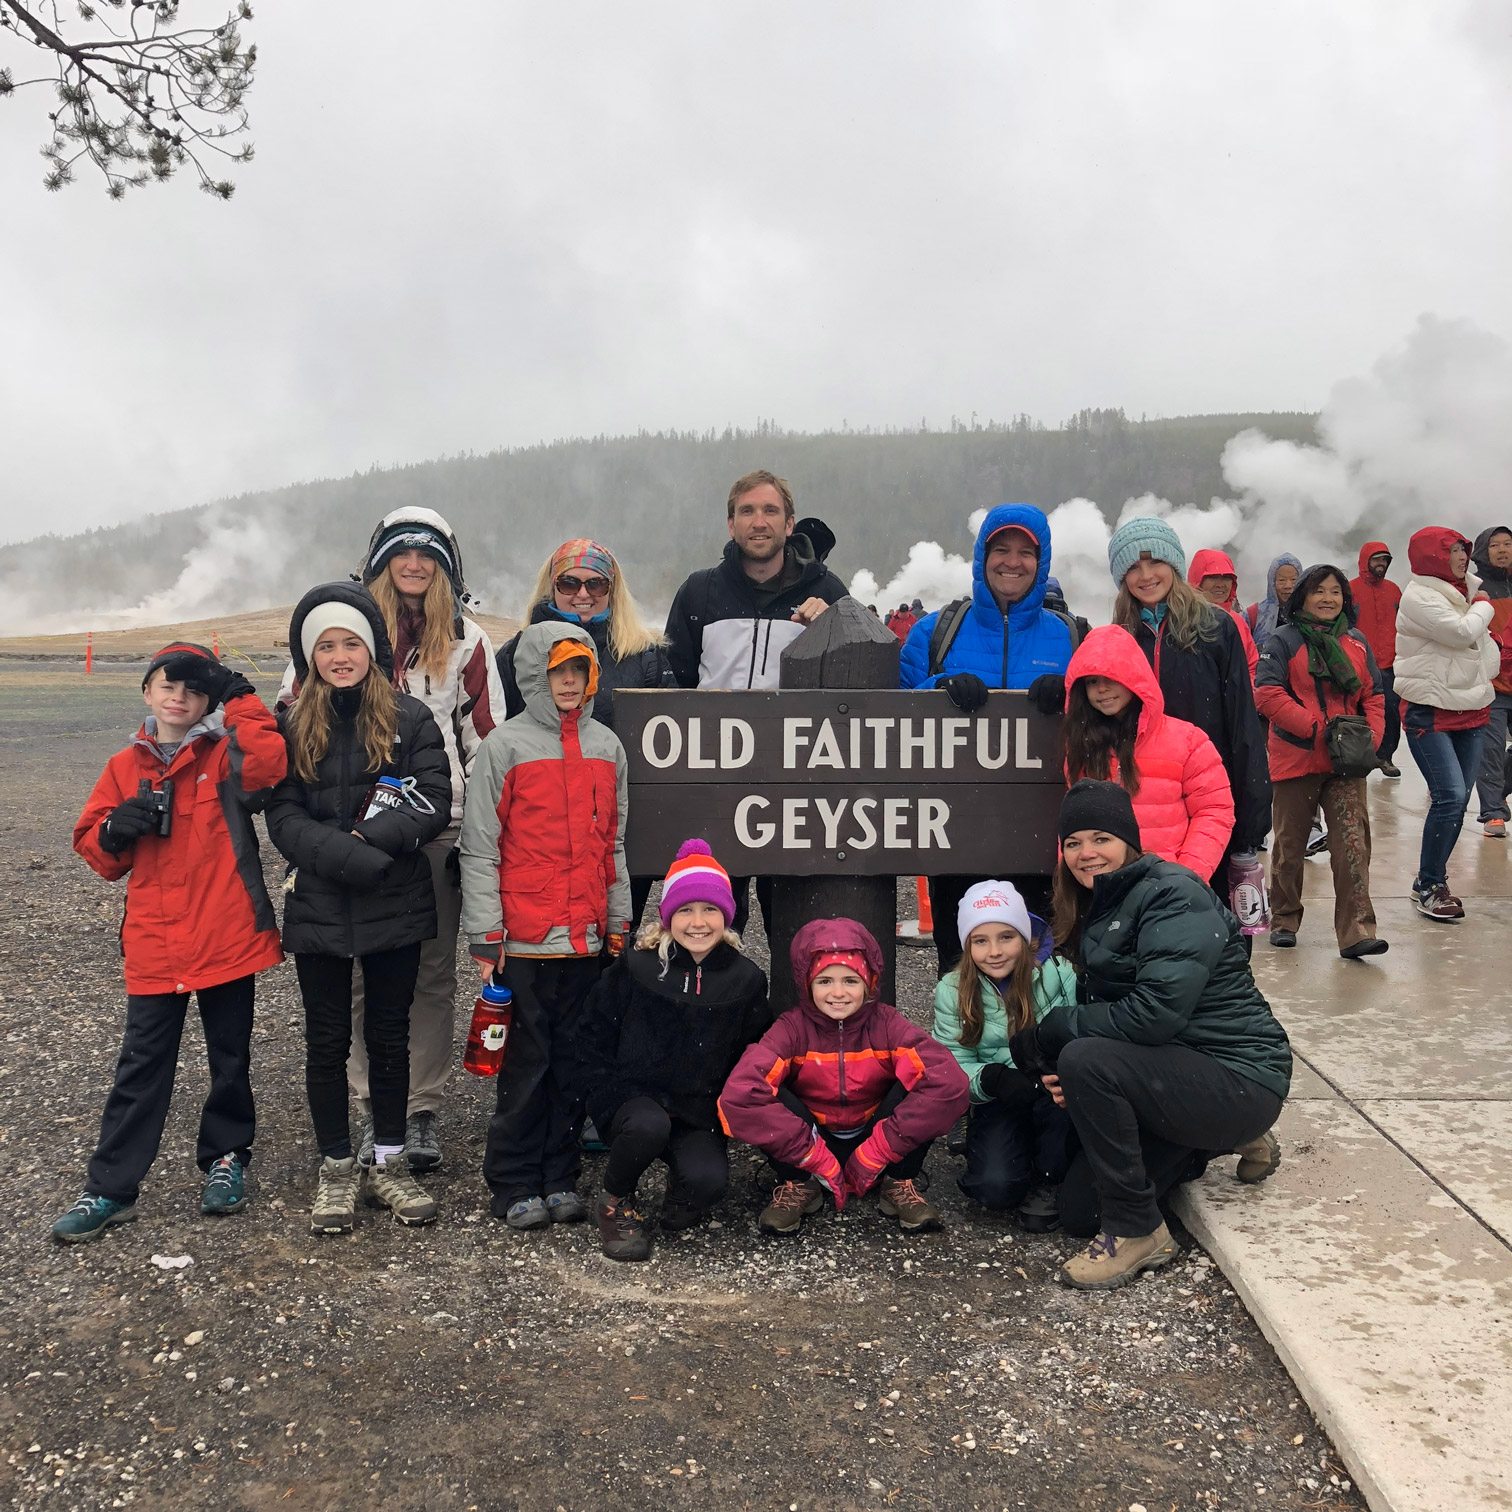 youth educational adventures group posing together by the old faithful geyser sign